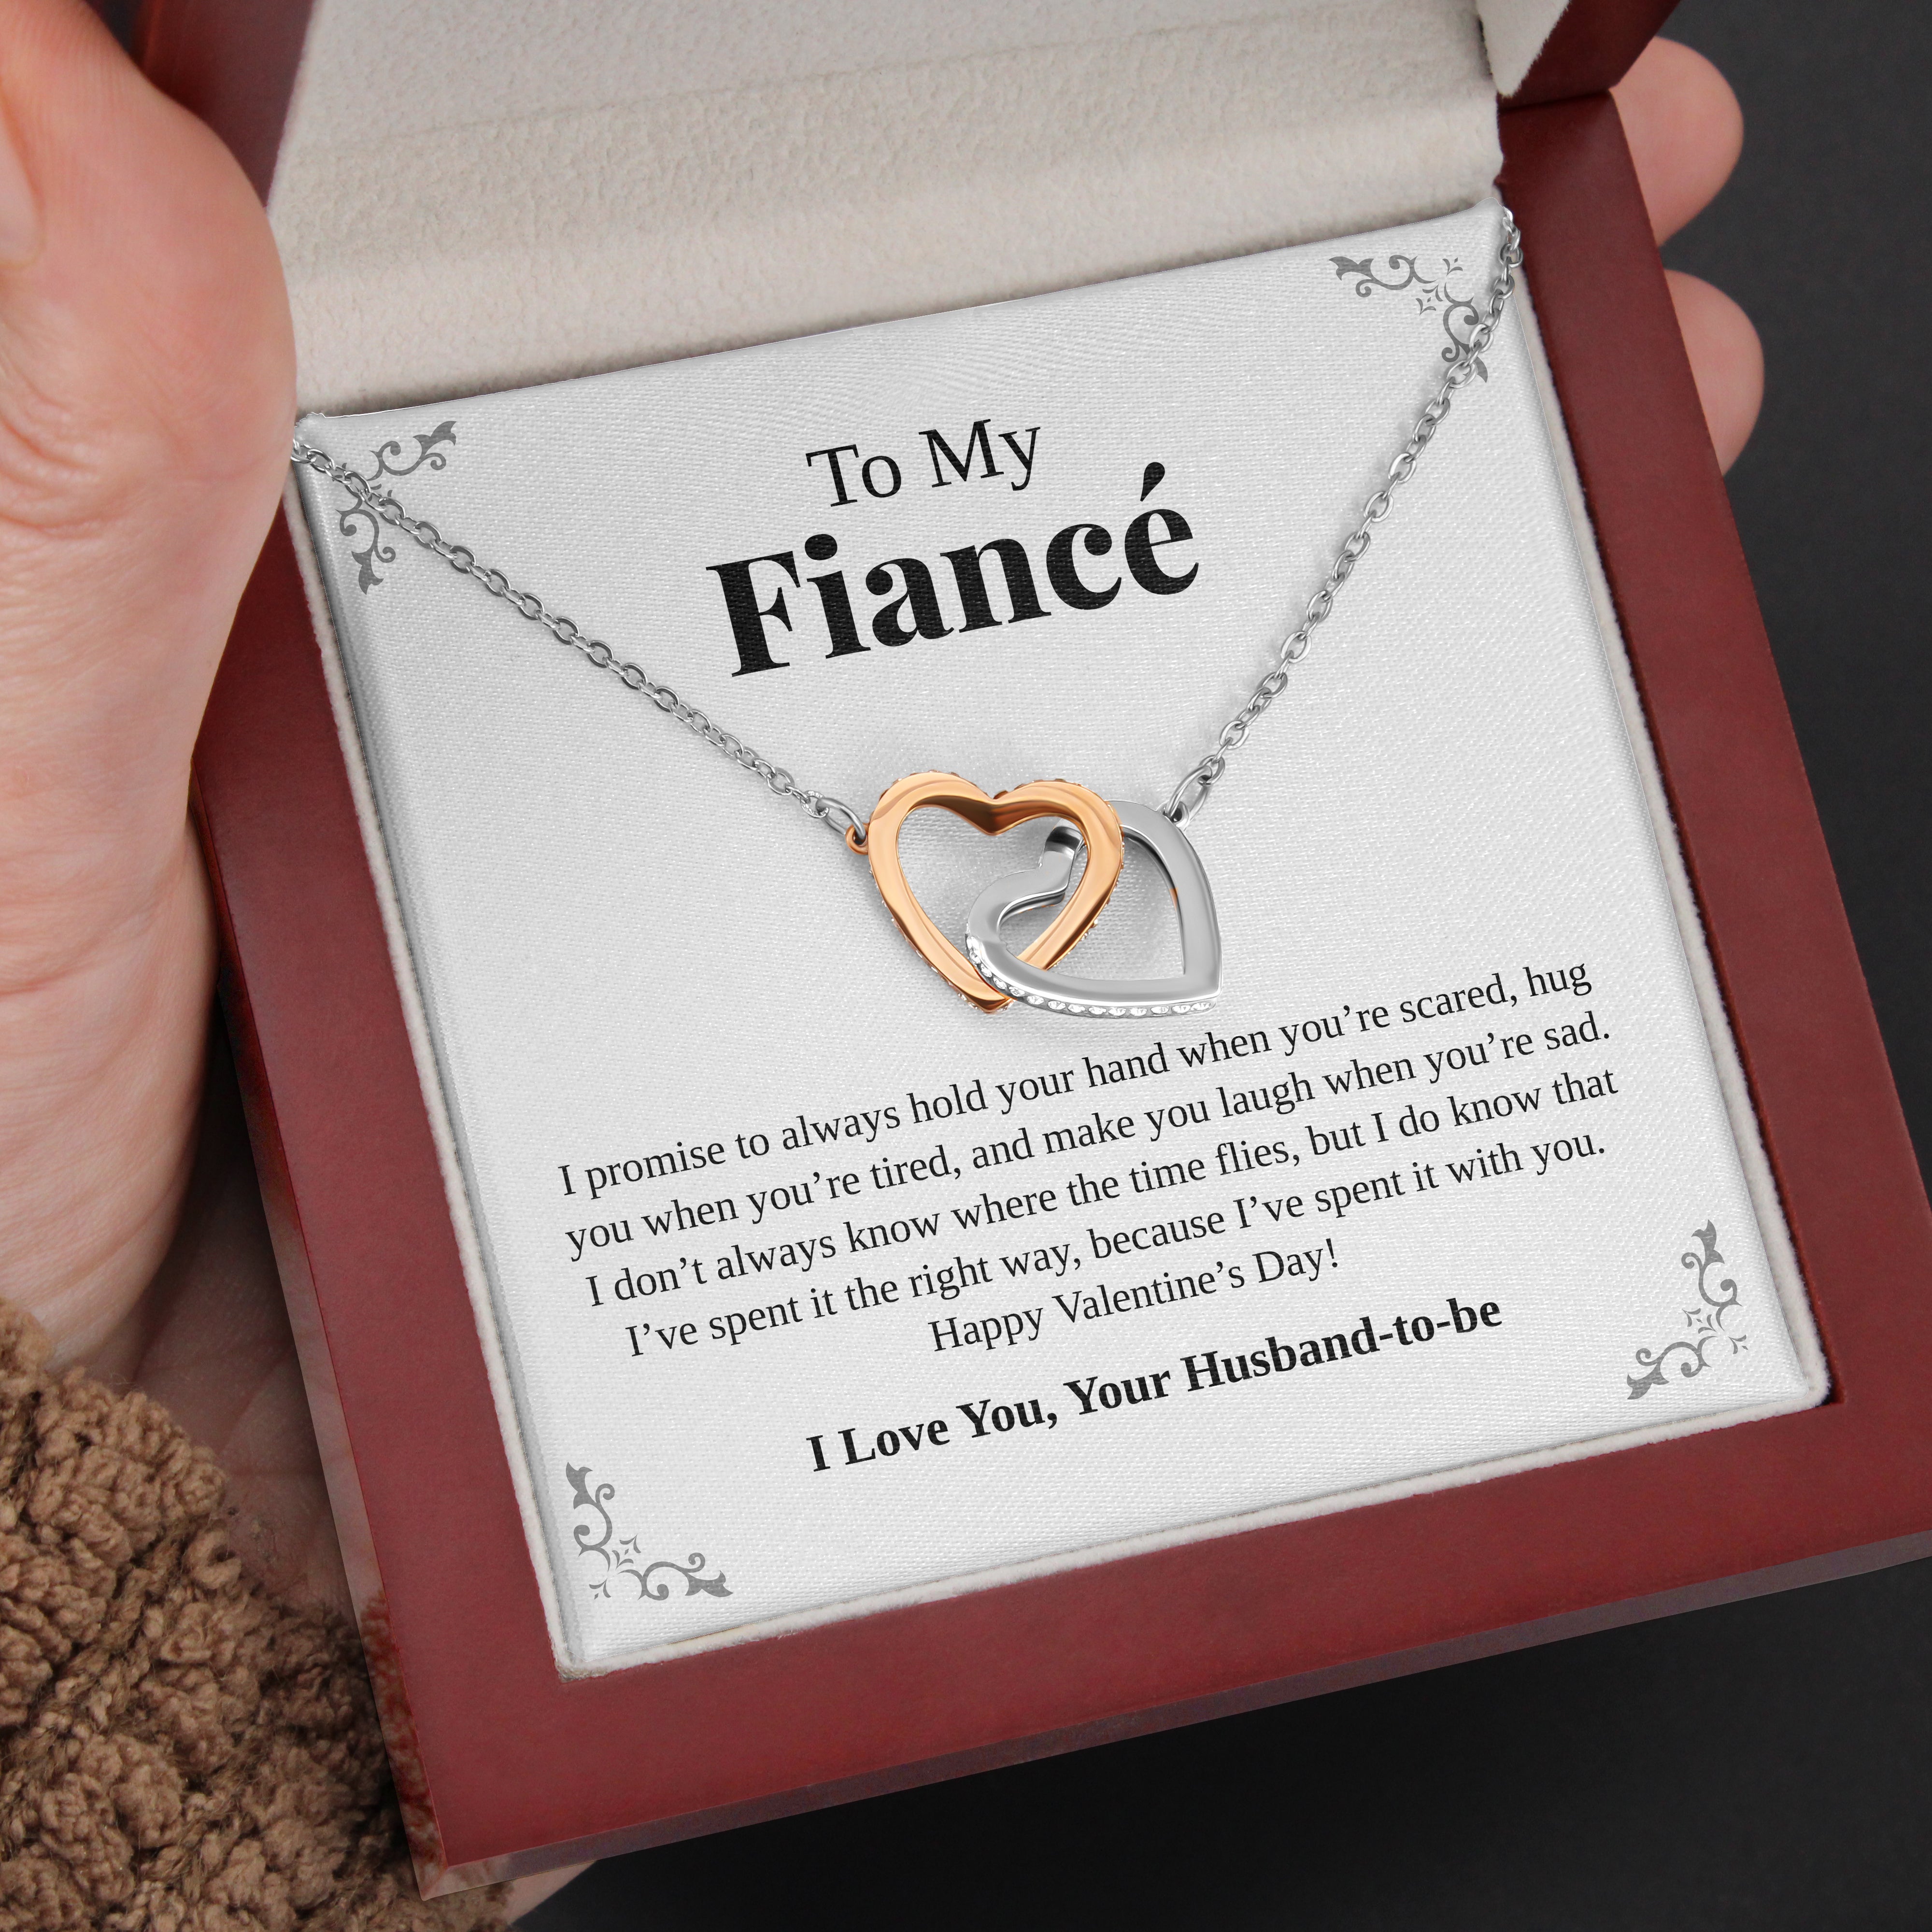 To My Fiance | “The Right Way” | Interlocking Hearts Necklace